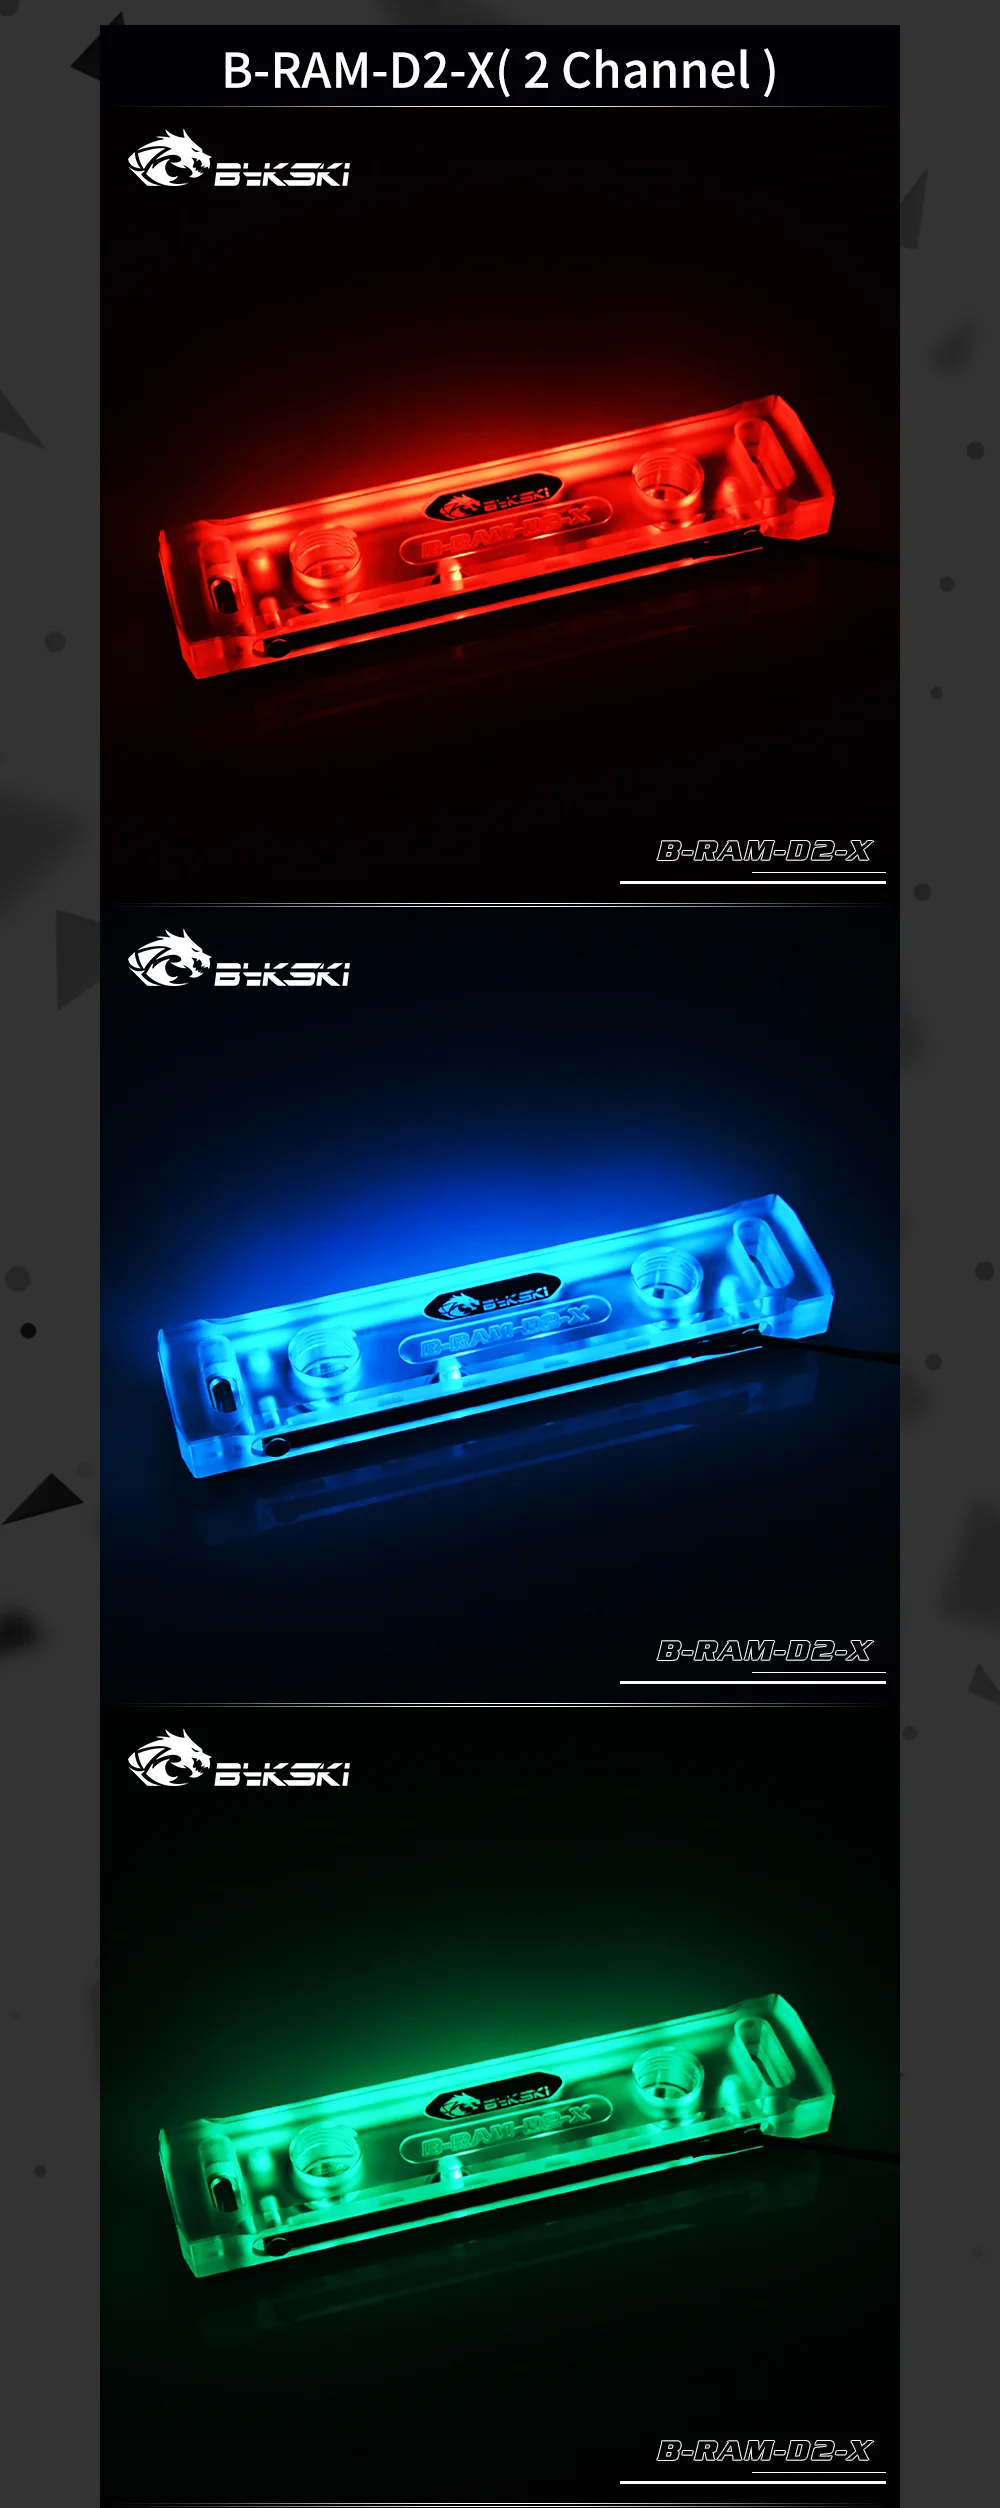 Bykski B-RAM-D2-X / B-RAM-D4-X RBW RGB Ram Water Block Acrylic Cover Support Two Ram Channel and Four Memory Channel  